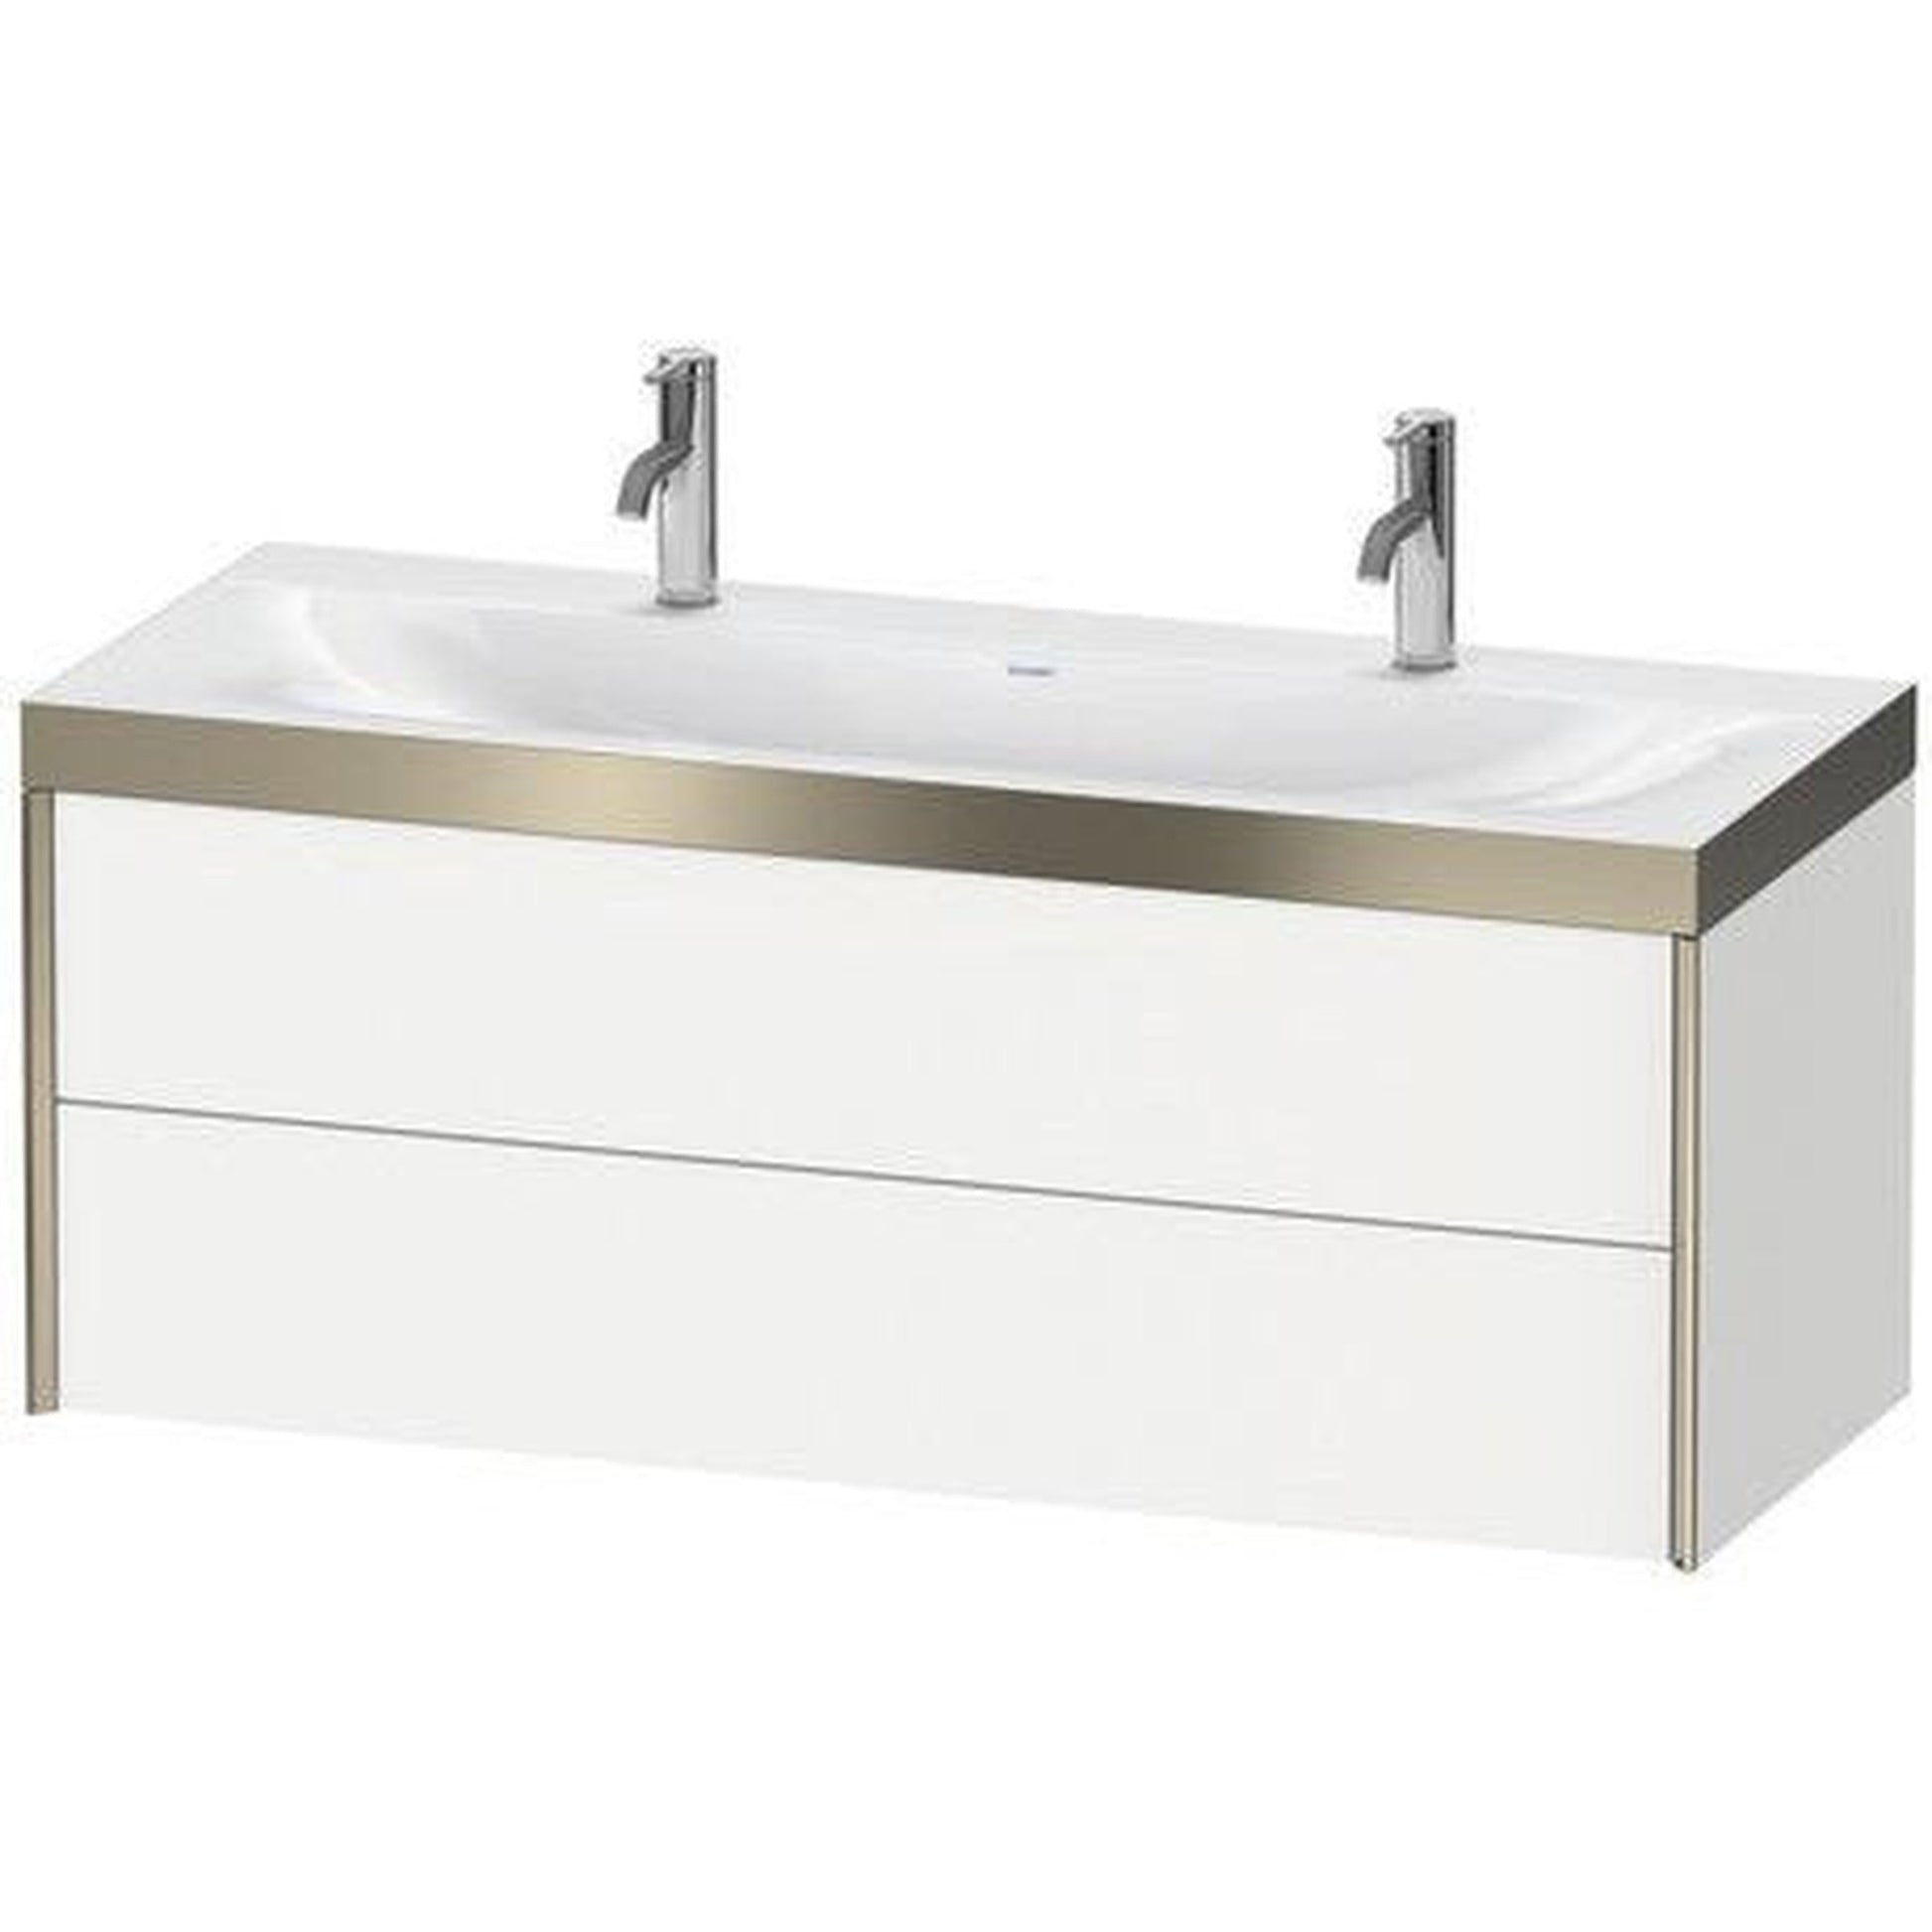 Duravit Xviu 47" x 20" x 19" Two Drawer C-Bonded Wall-Mount Vanity Kit With One Tap Hole, Dark Brushed Oak (XV4618OB272P)